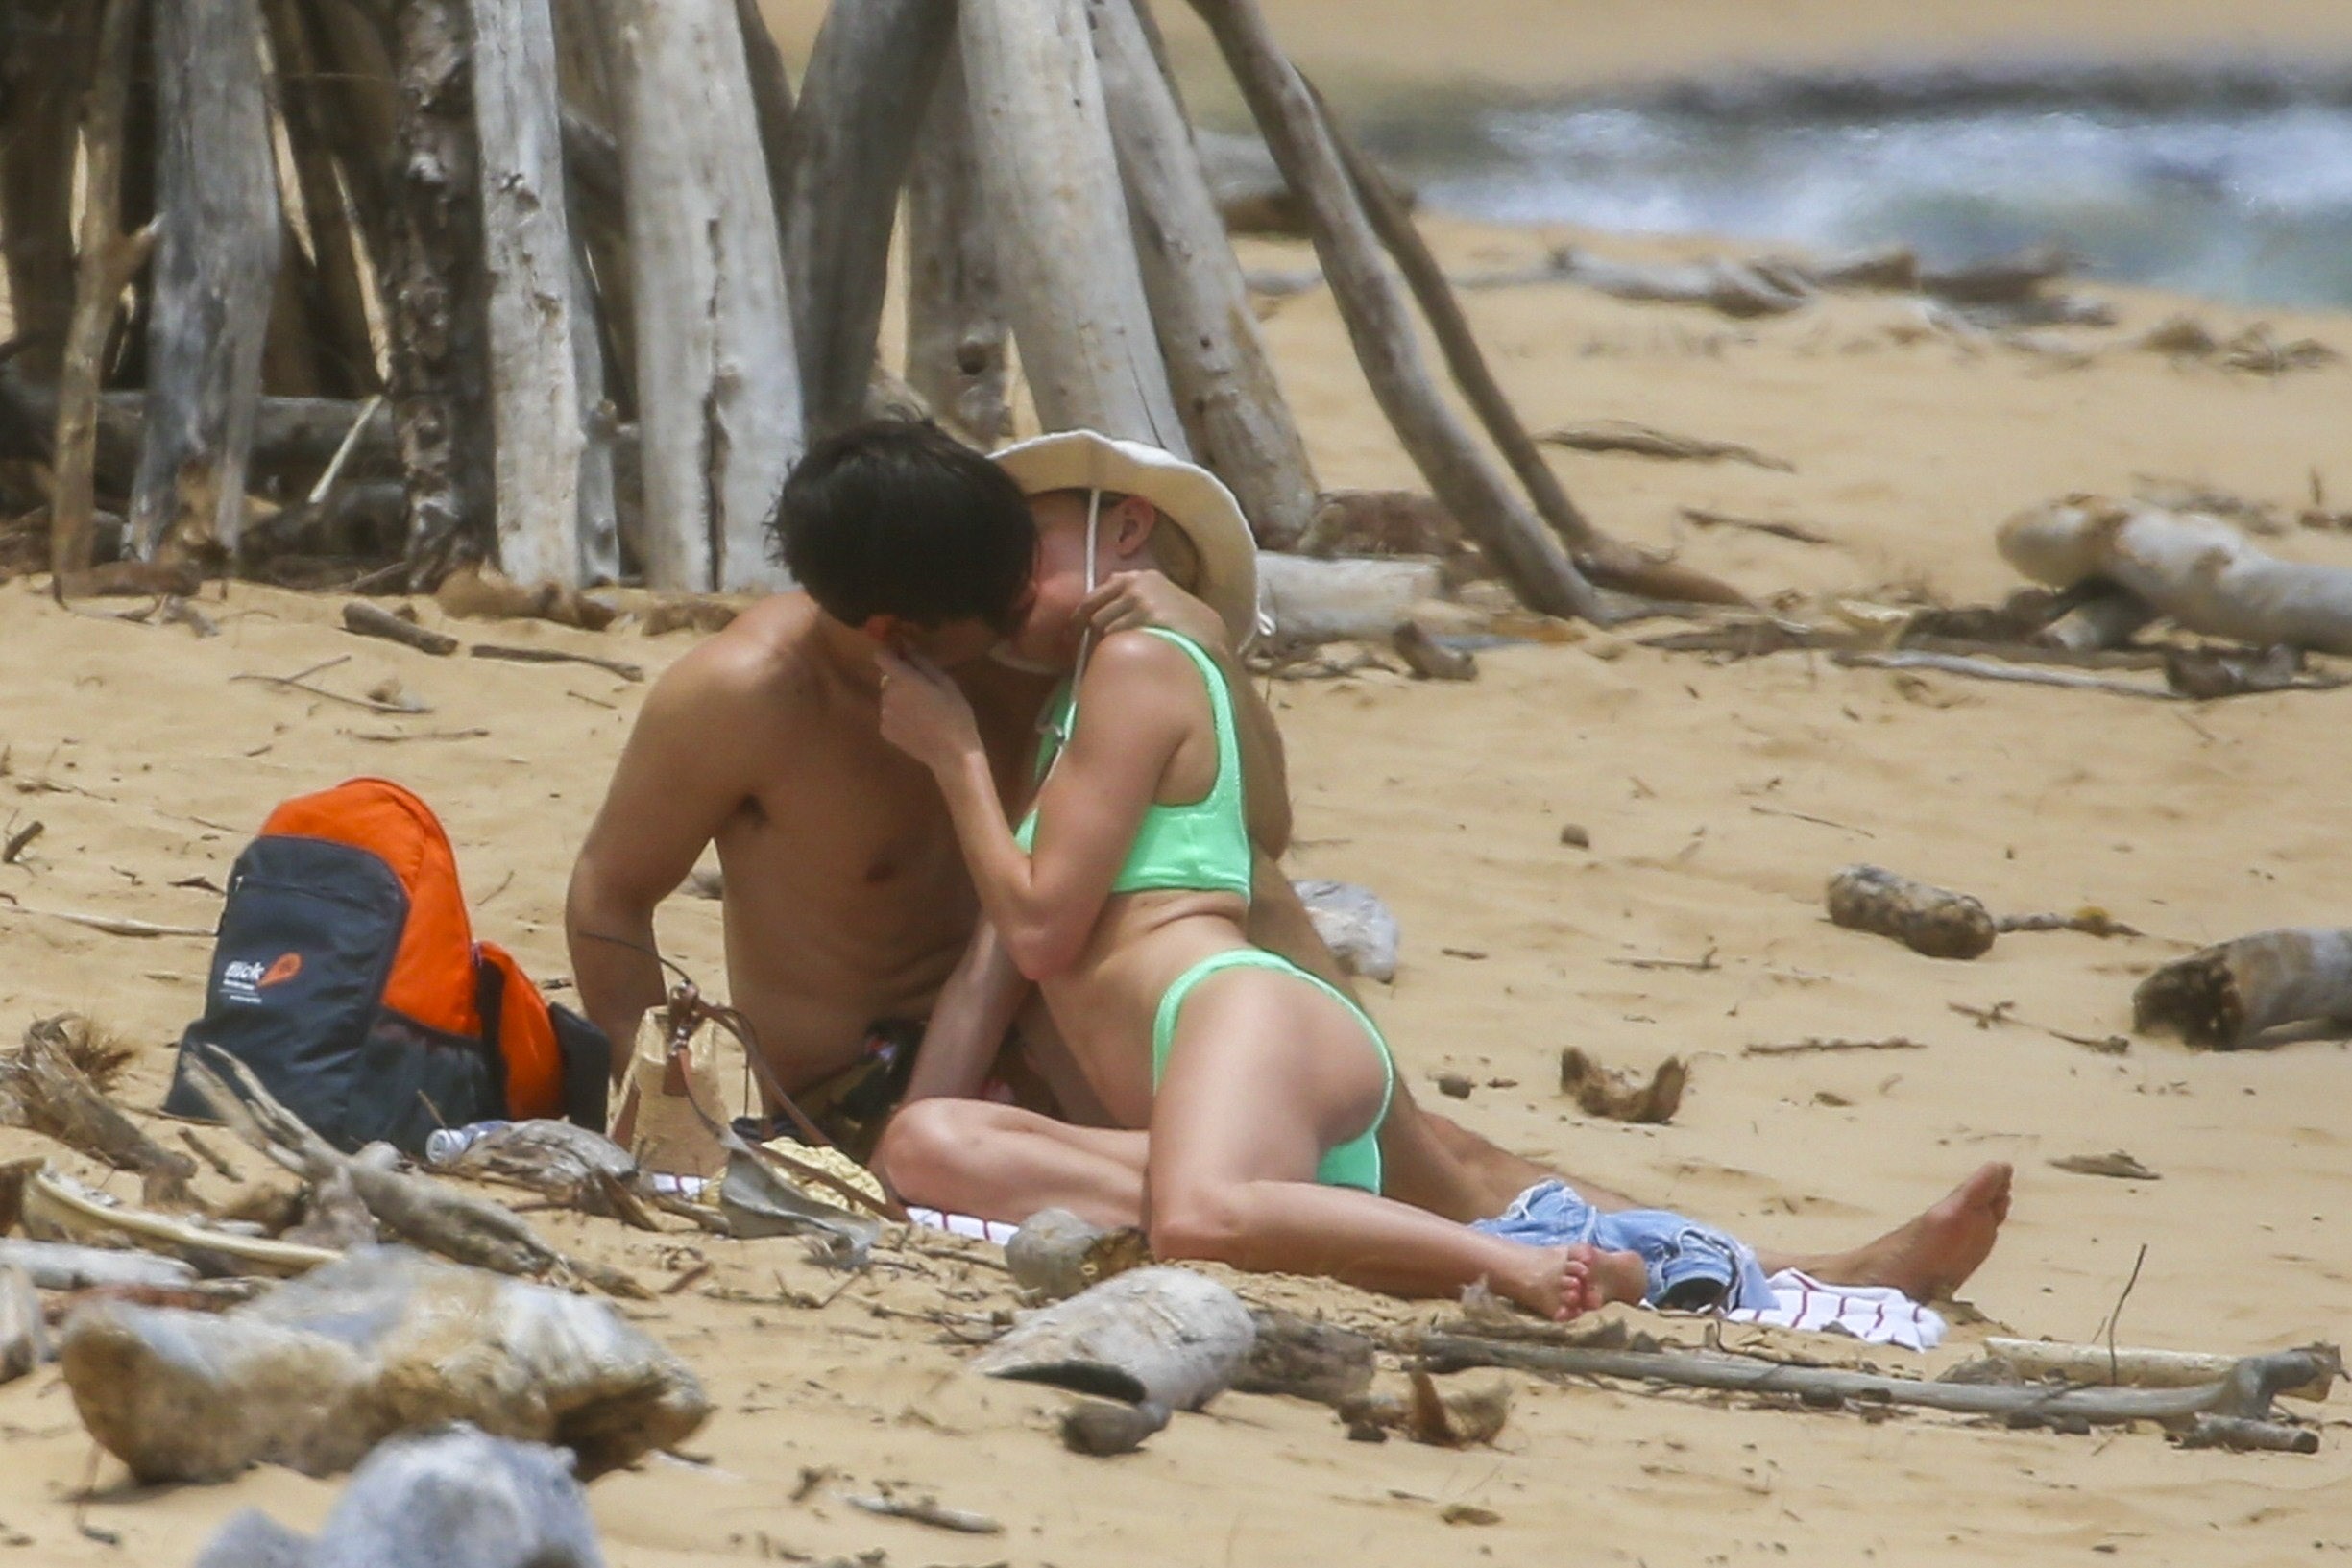 Photo © 2022 Backgrid/The Grosby GroupEXCLUSIVEHawaii , April 22 , 2022Kate Bosworth and Justin Long pack on the PDA during their tropical getaway in Hawaii. The adorable couple were seen enjoying a day on the beach in Kaua’i while visiting the gorgeo (Foto: Backgrid/The Grosby Group)